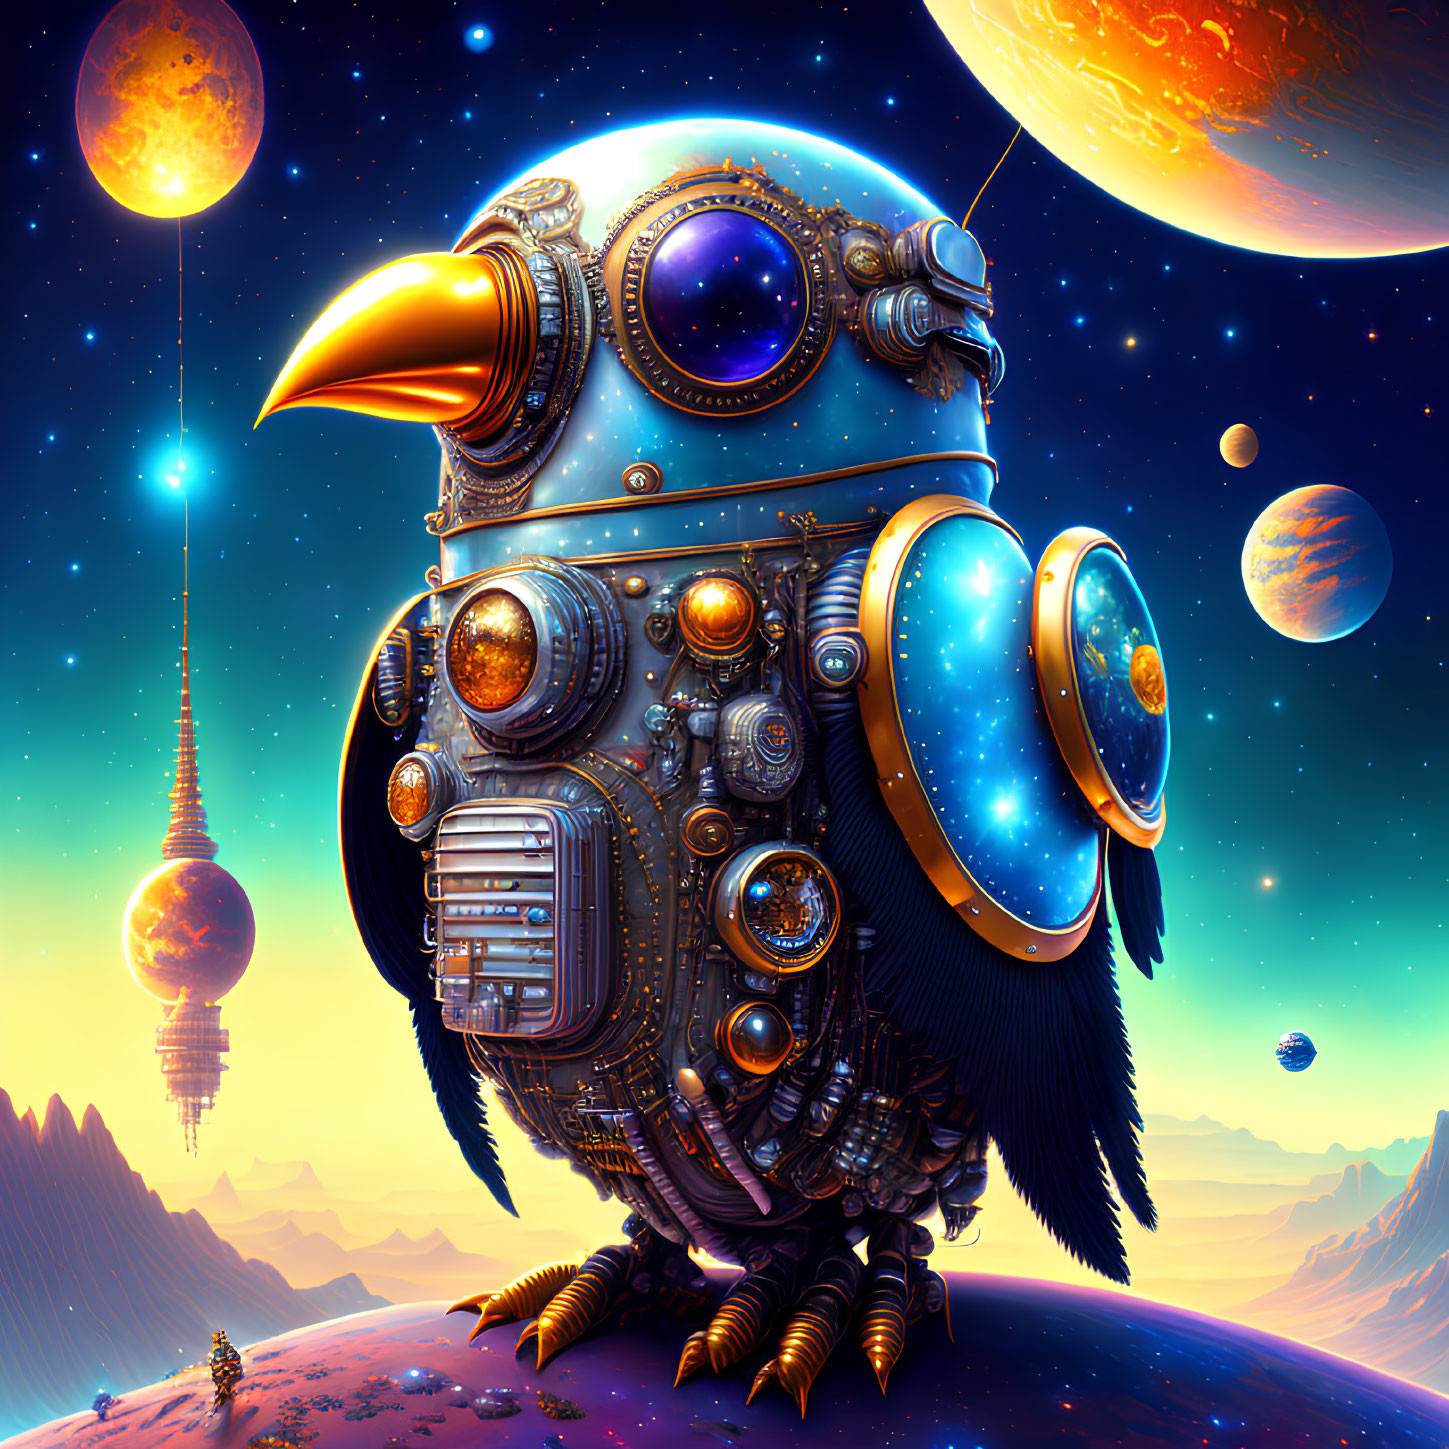 Steampunk mechanical owl with metallic feathers in cosmic setting